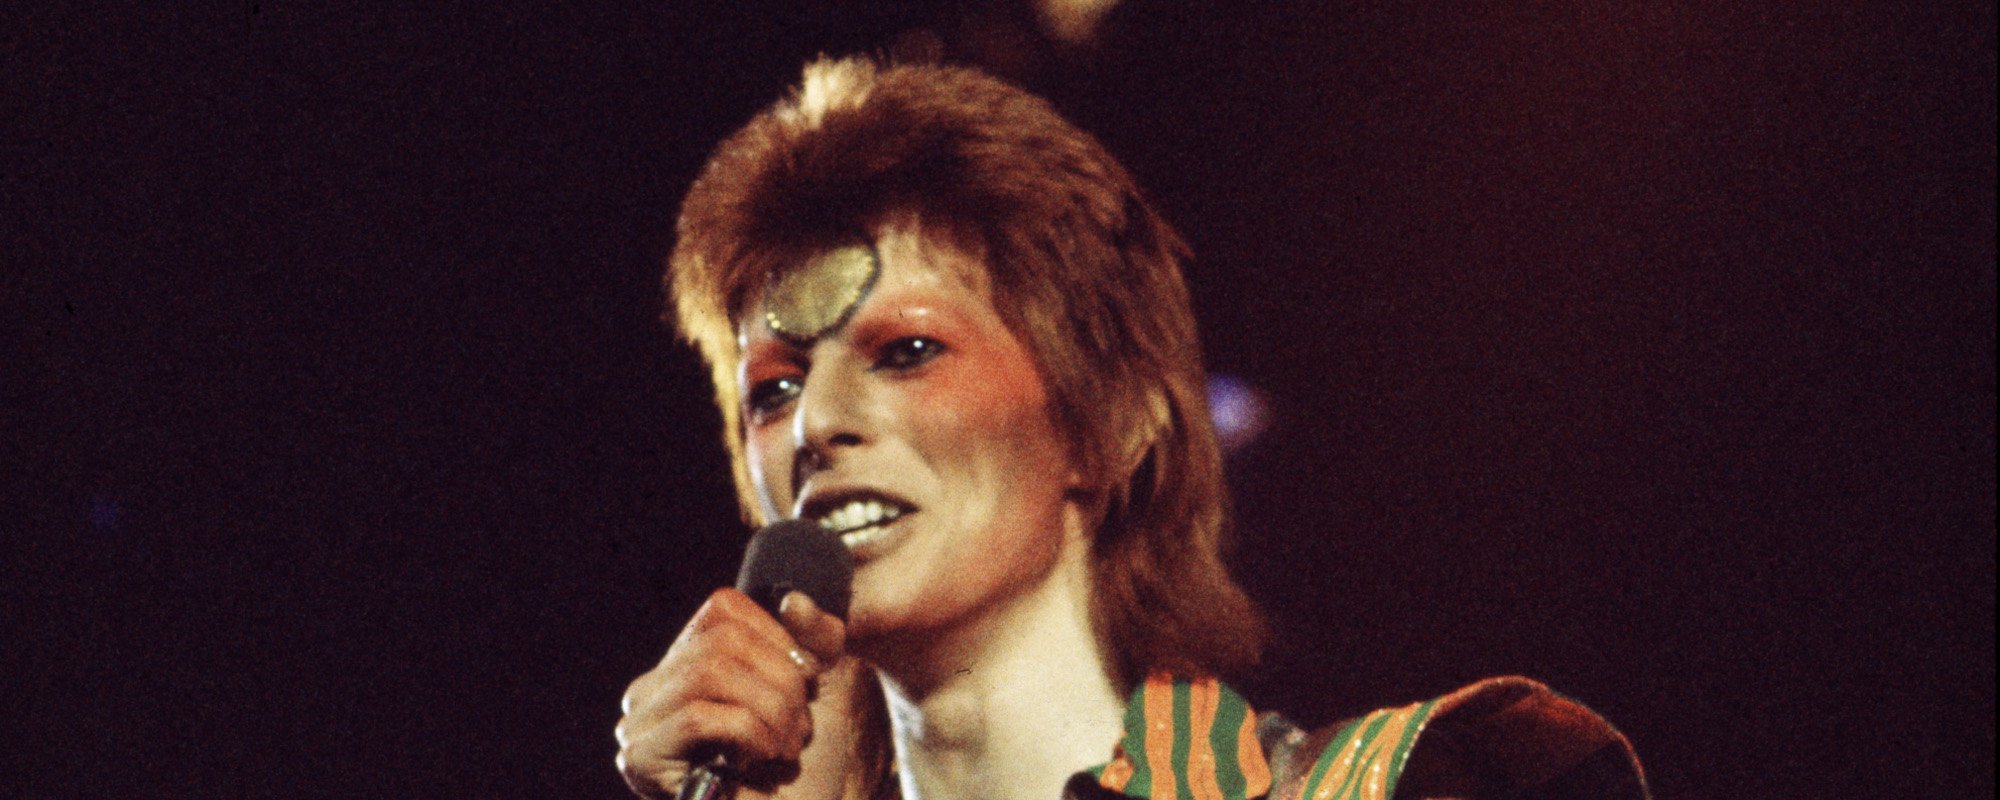 10 Iconic Moments From David Bowie's Career